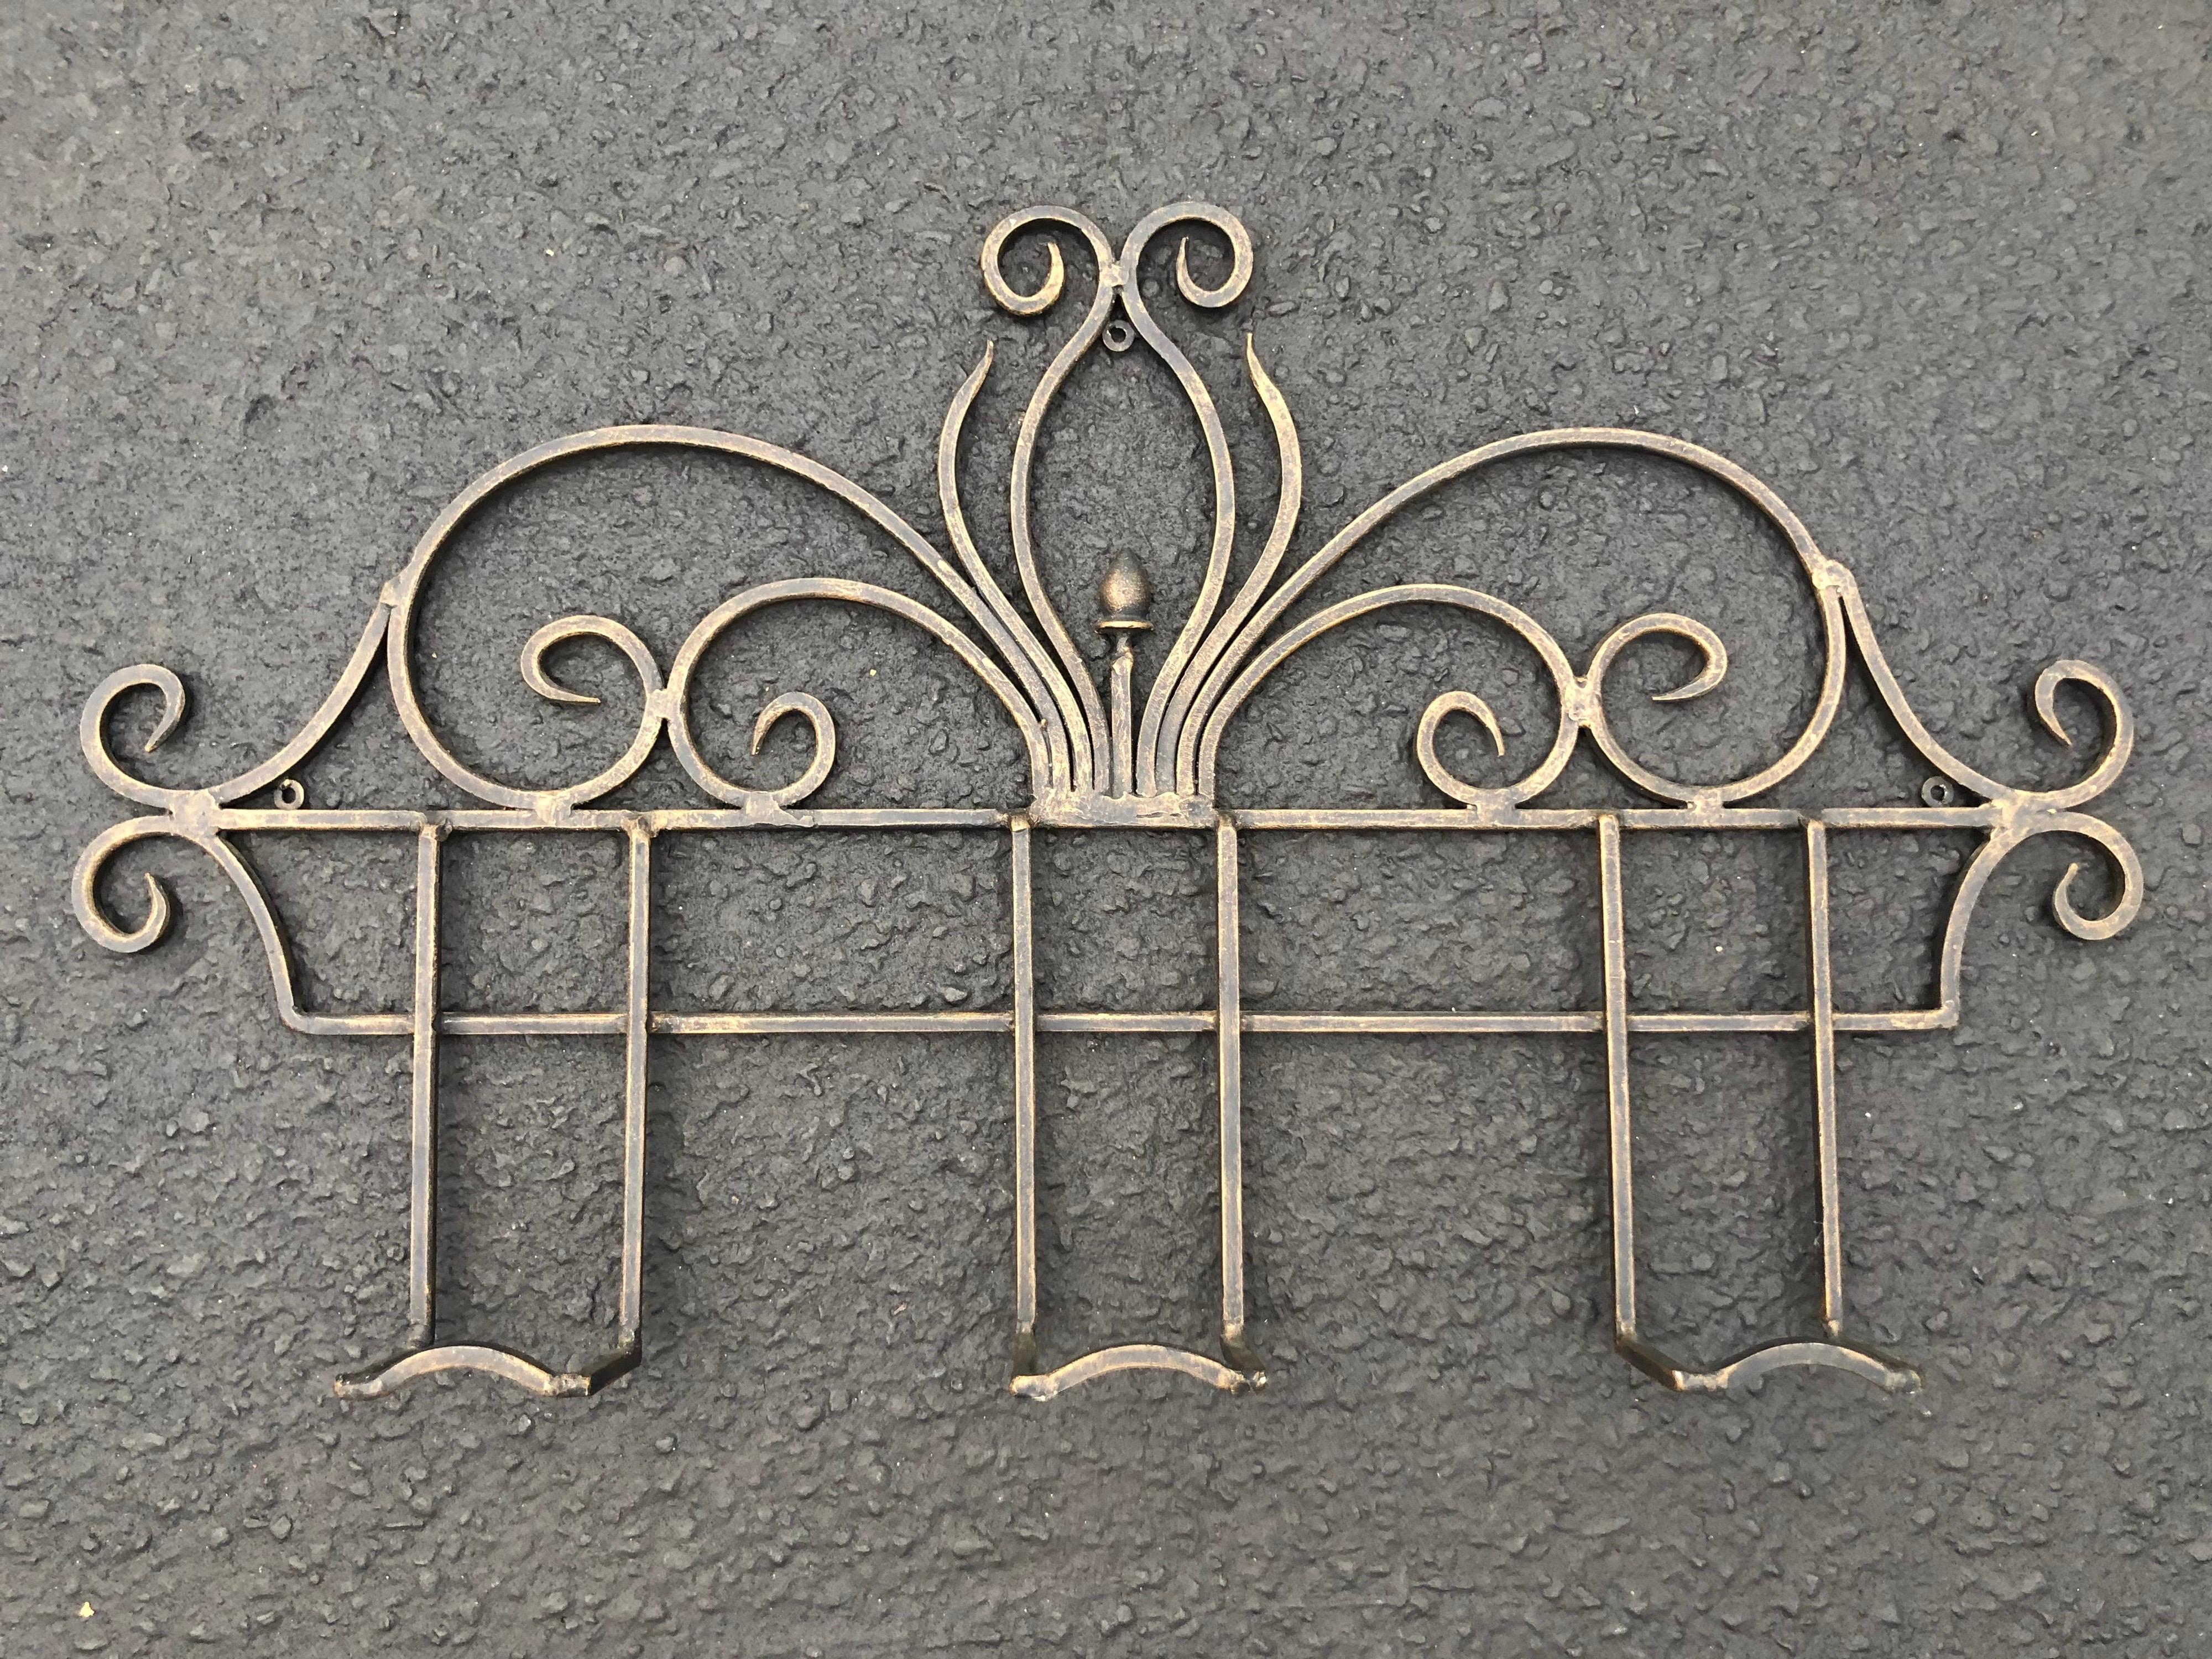 Decorative iron wall coat rack. Simple lines and design make up this silver iron rack. Perfect for an entry way or use in a bathrooom to hang towels or robes . Also sturdy enough to use outdoor as well. Art Deco style.
       